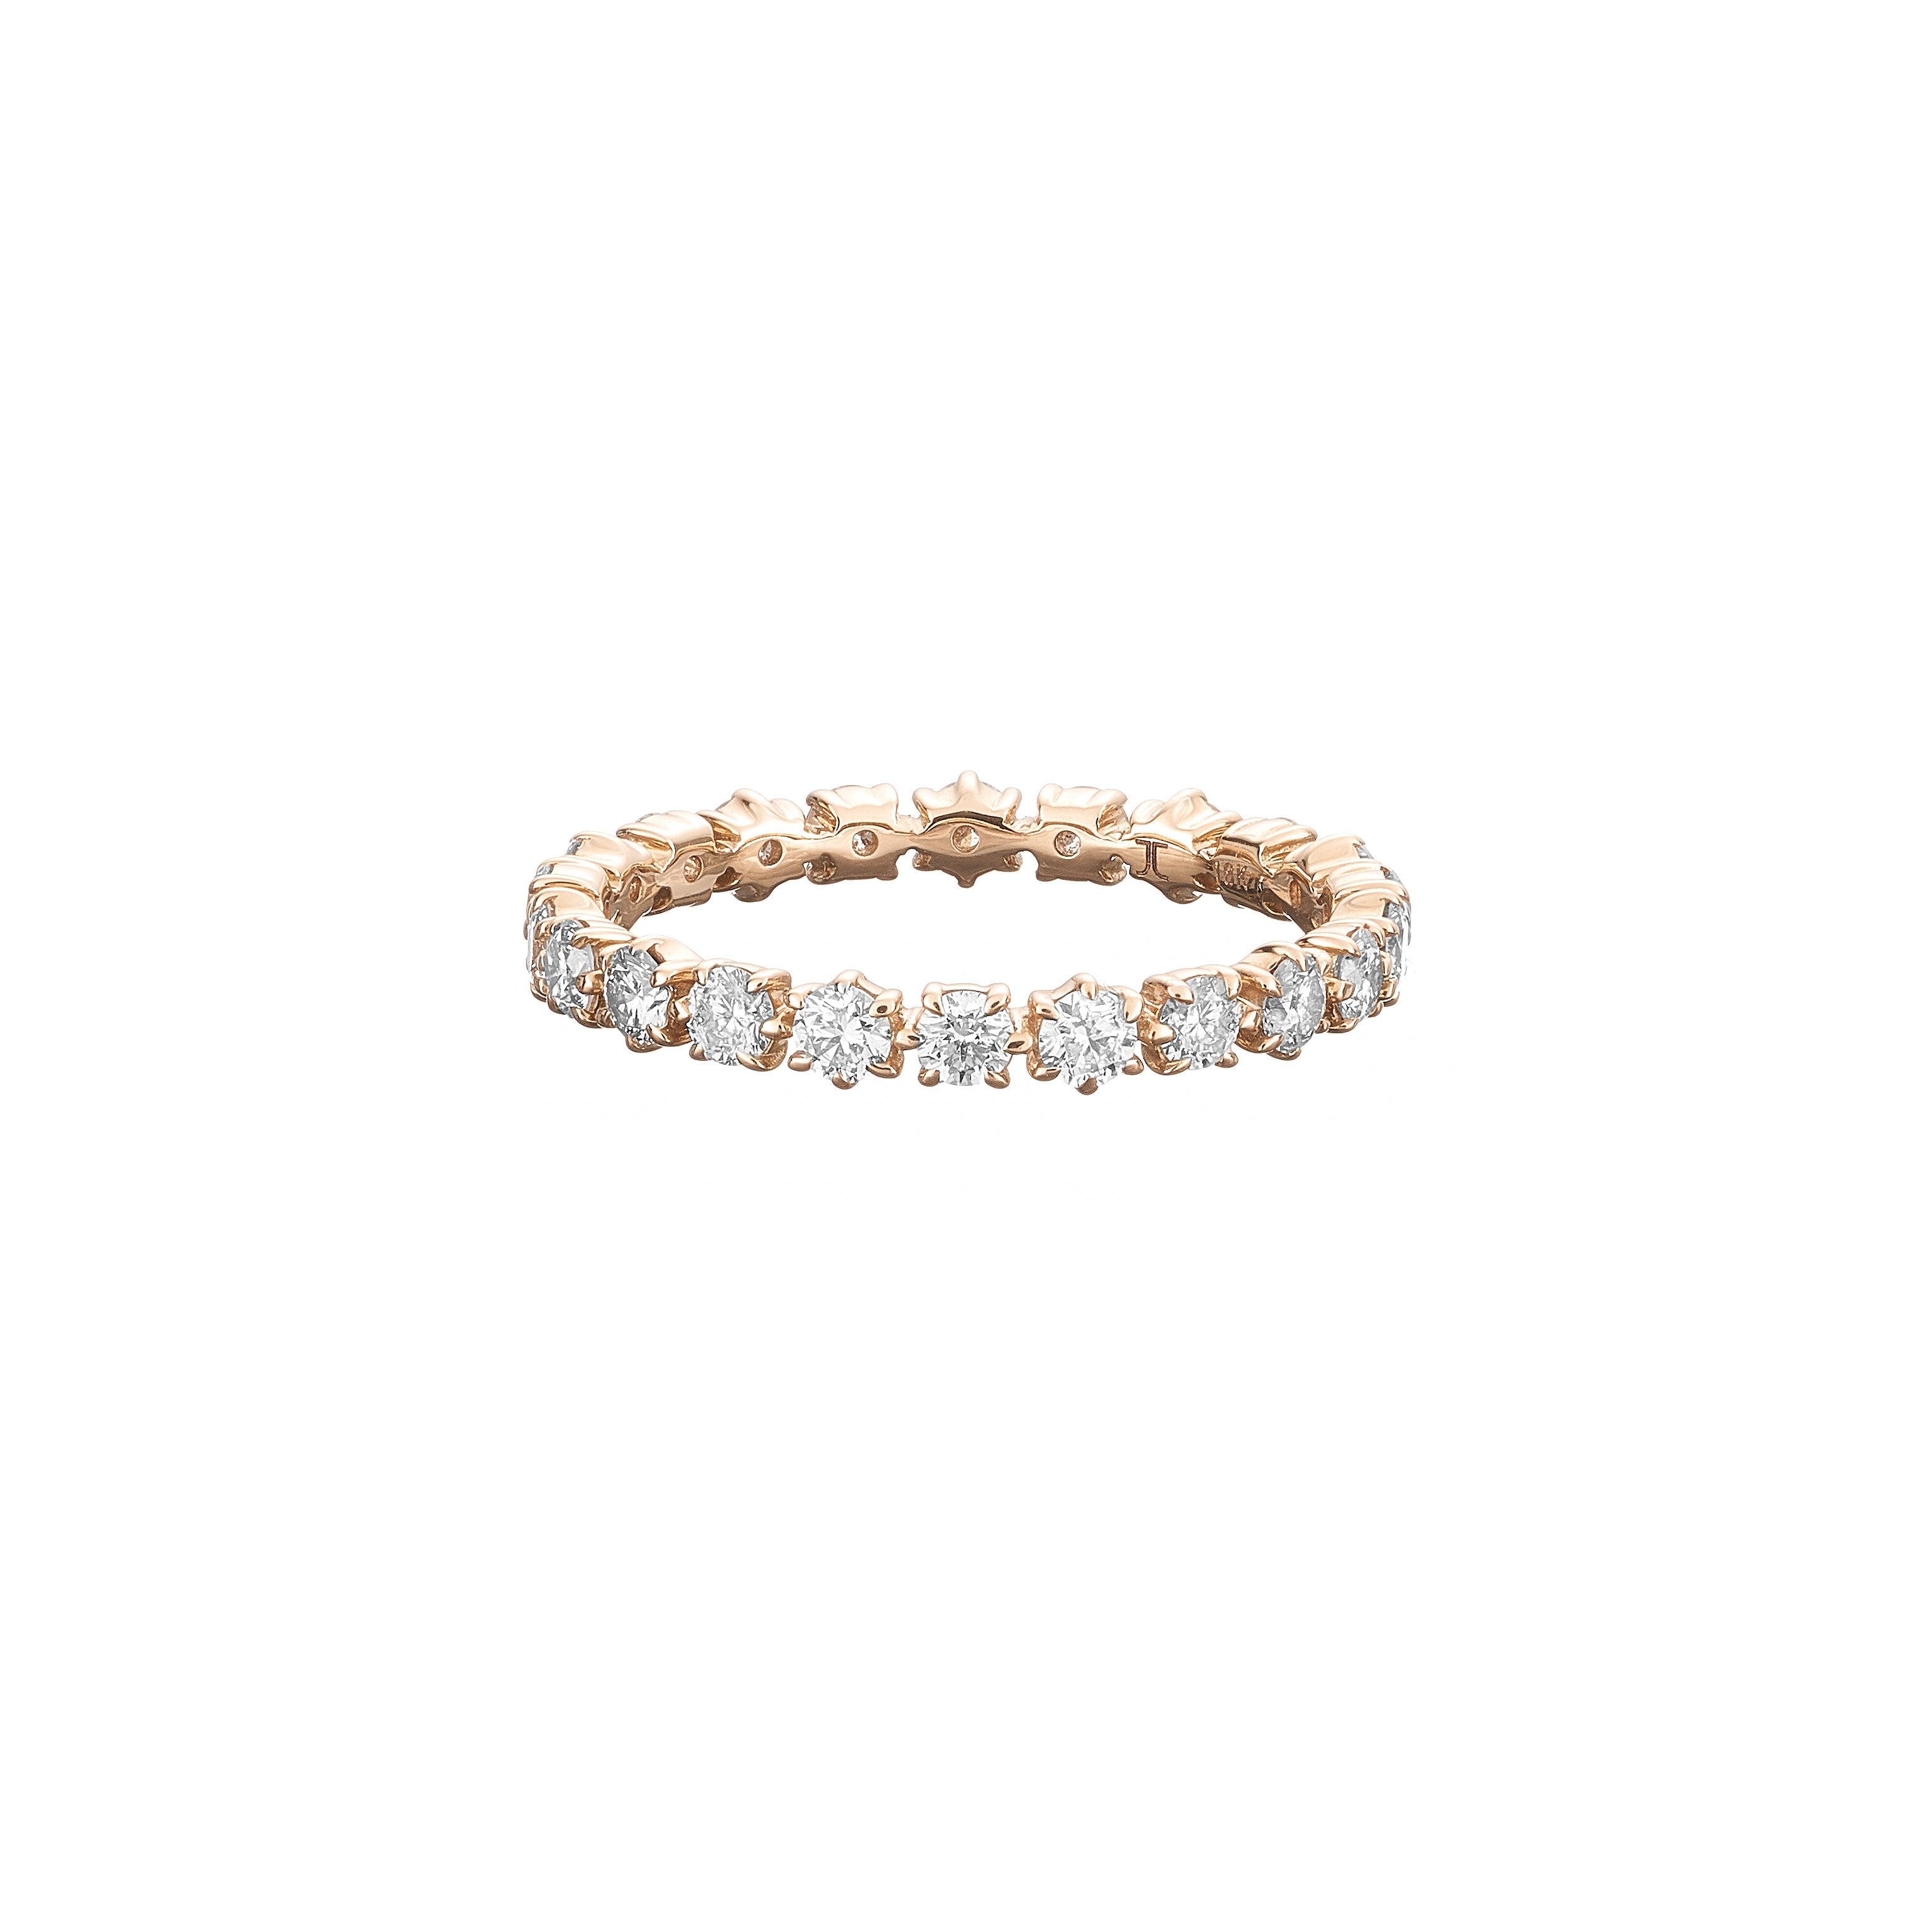 Catherine Diamond Eternity Band No.1 in 18K Rose Gold